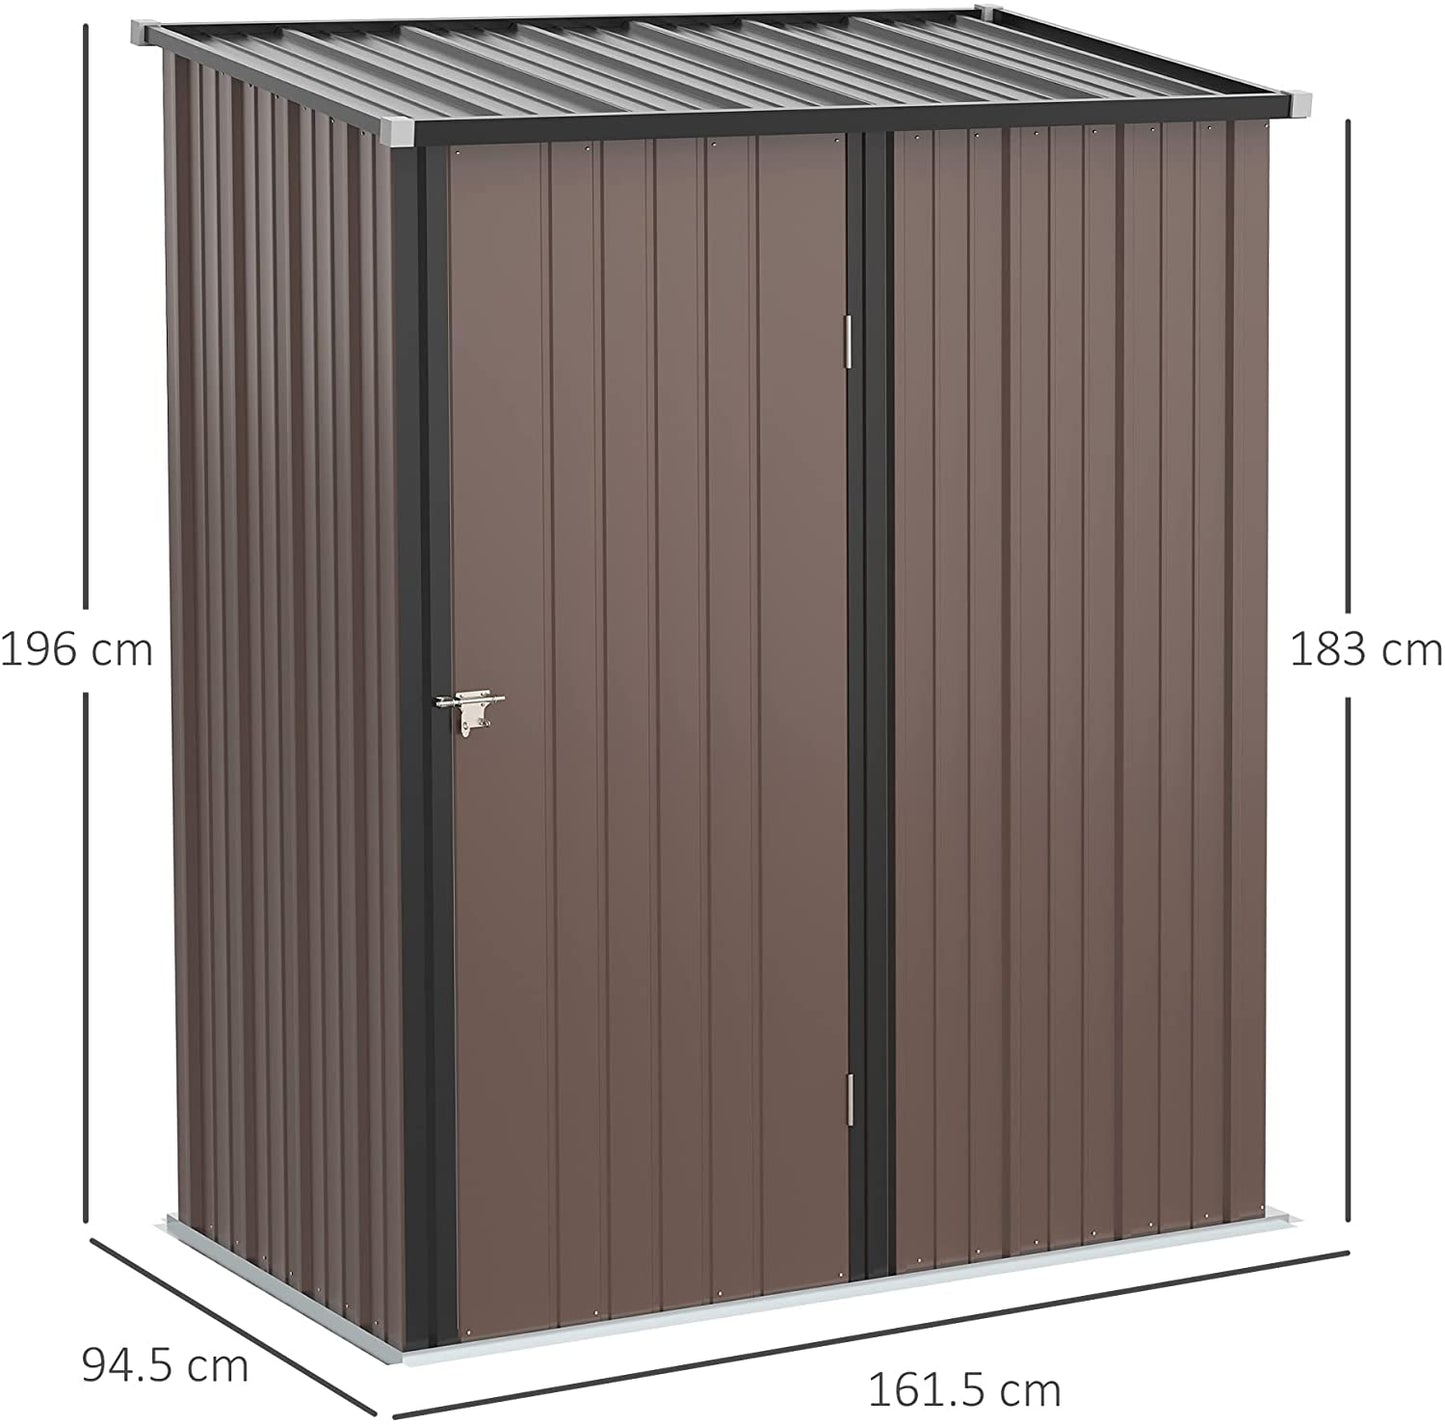 Outsunny Outdoor Storage Shed Steel Garden Shed w/ Lockable Door for Backyard Patio Lawn